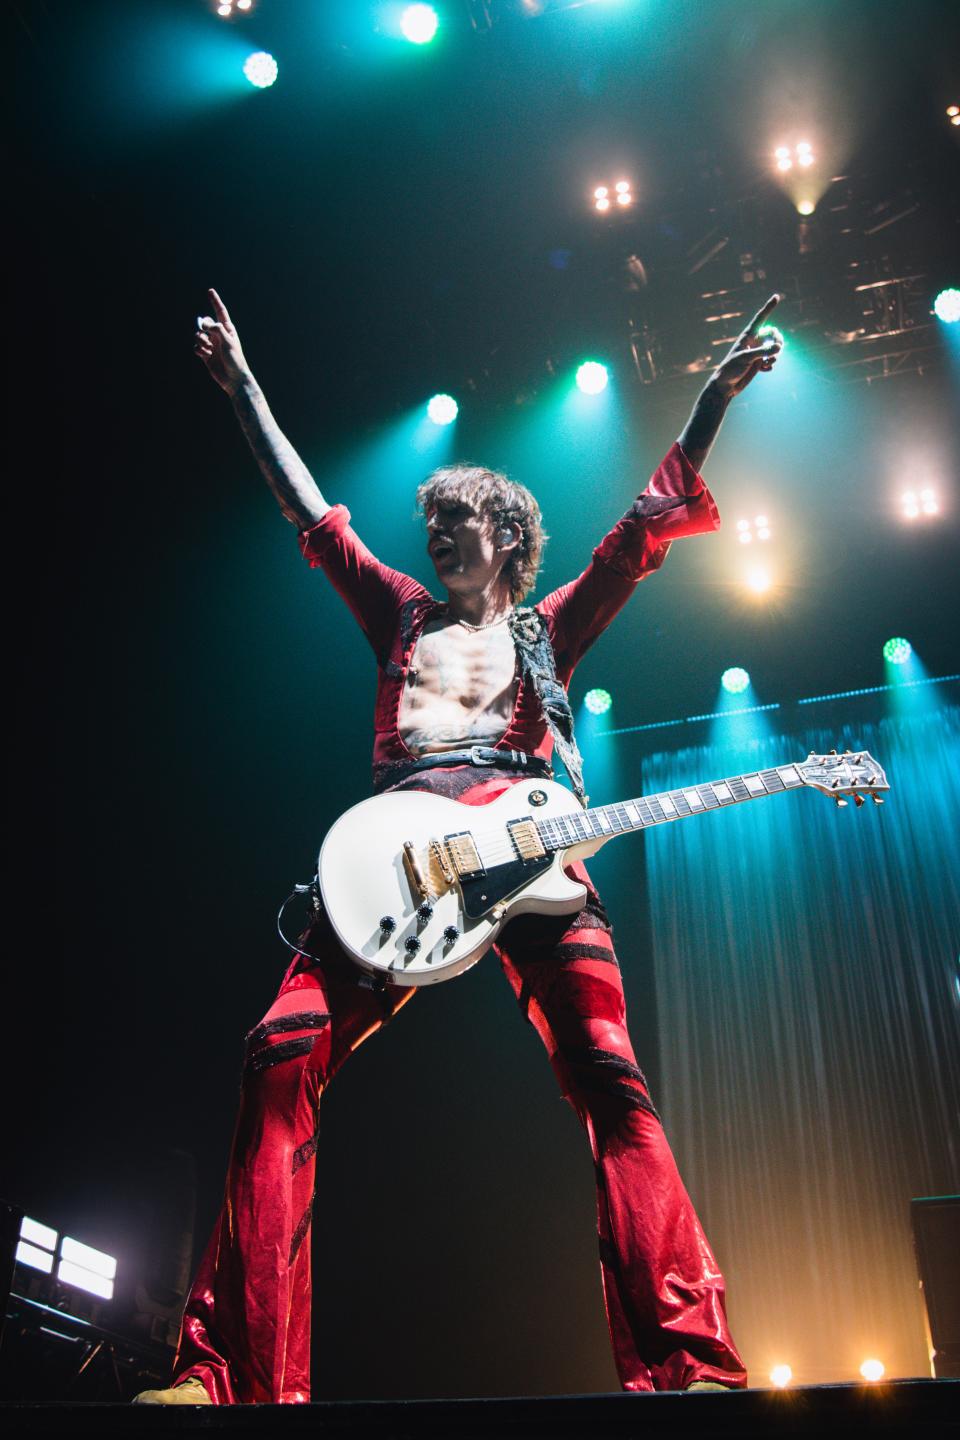 The Darkness frontman Justin Hawkins says "I Believe in a Thing Called Love" was a "gift" for the band.